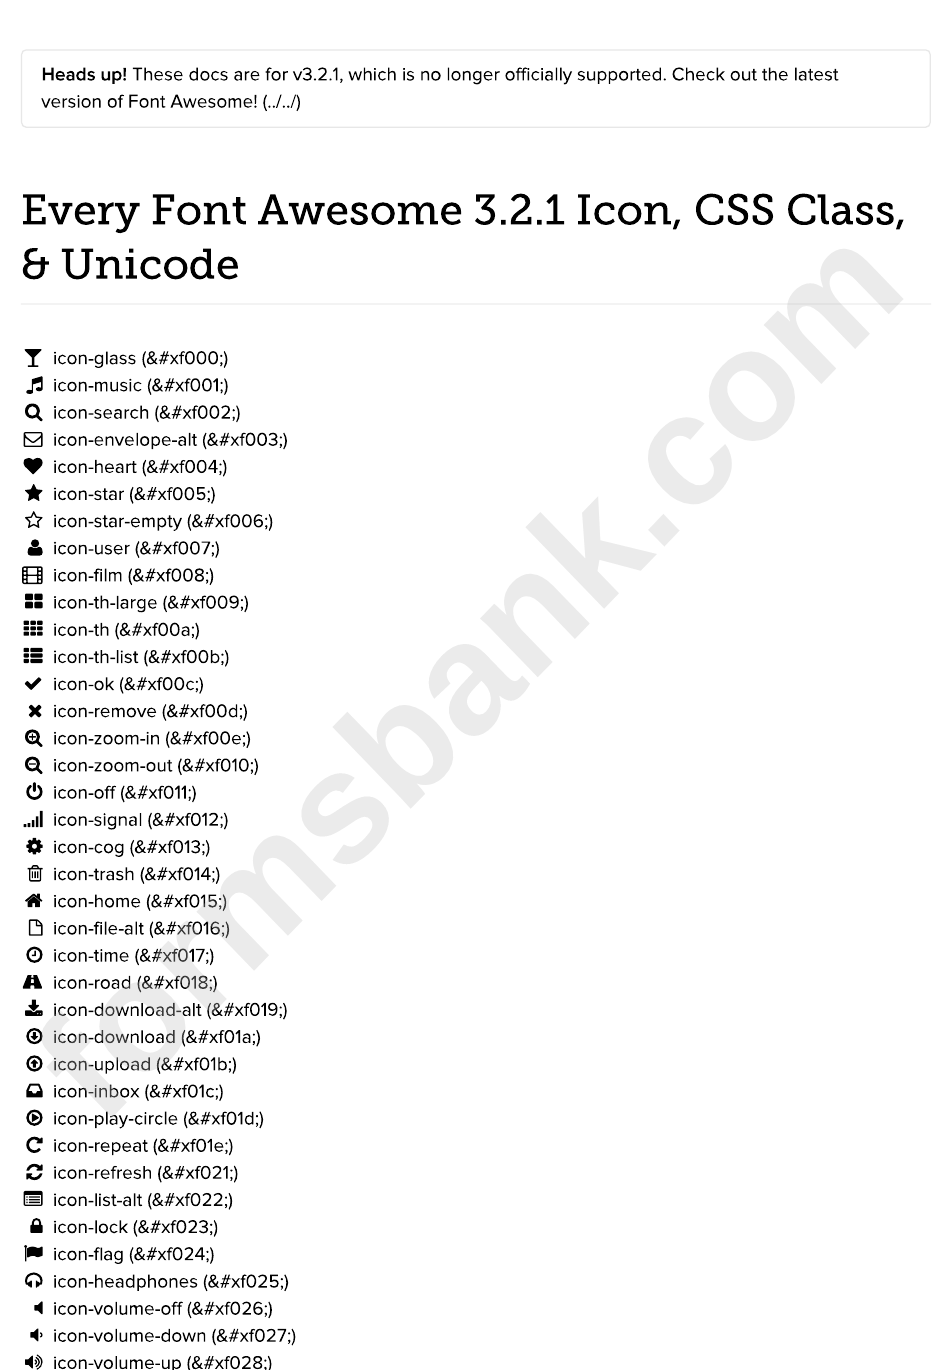 Every Font Awesome 3.2.1 Icon, Css Class, & Unicode